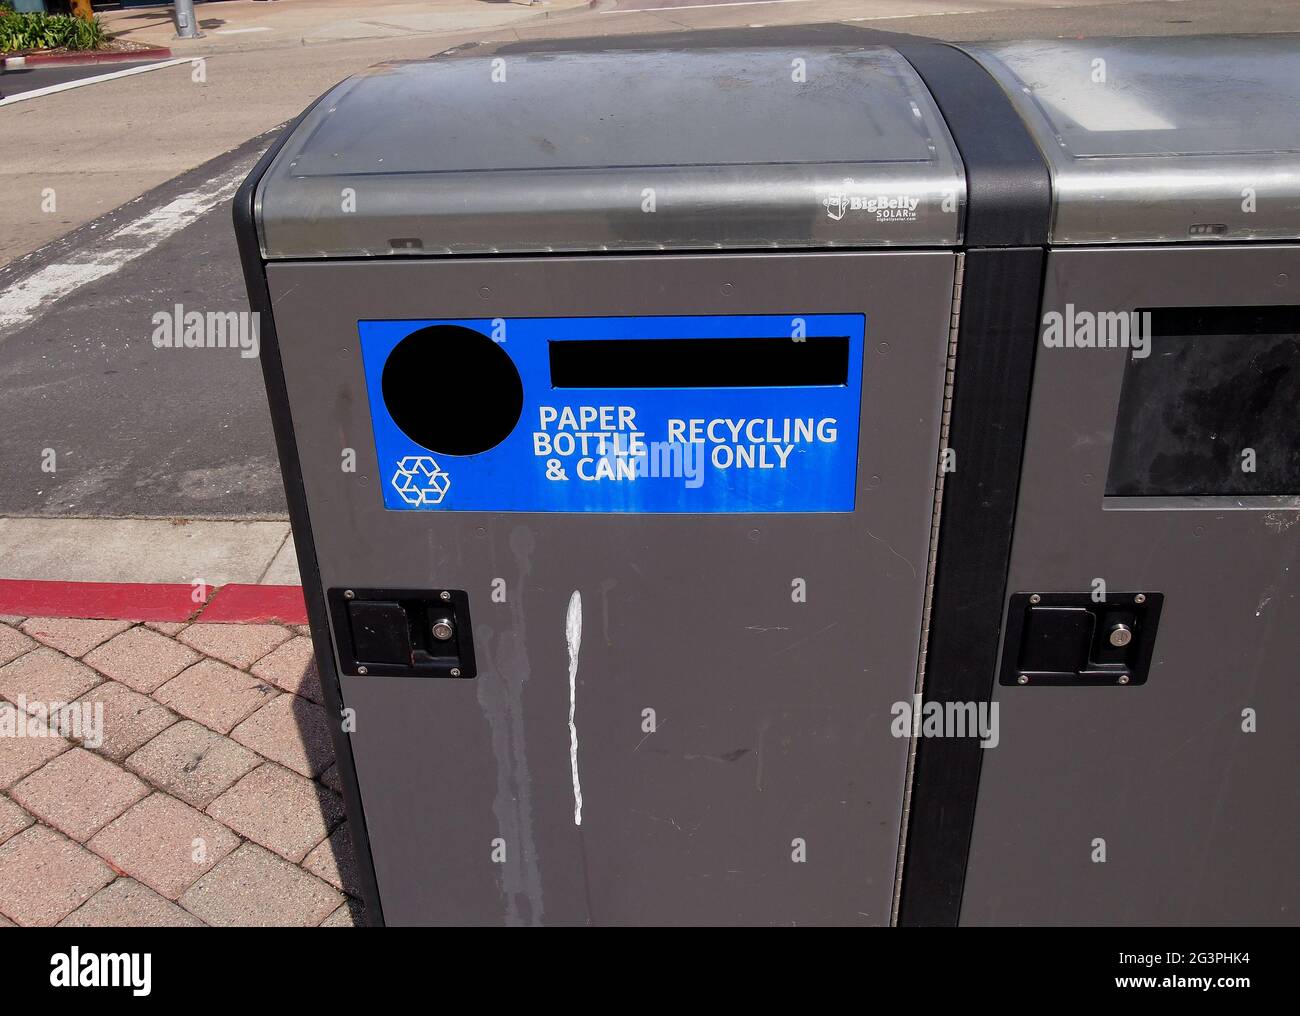 recycling only container for paper, bottles and cans in California Stock Photo